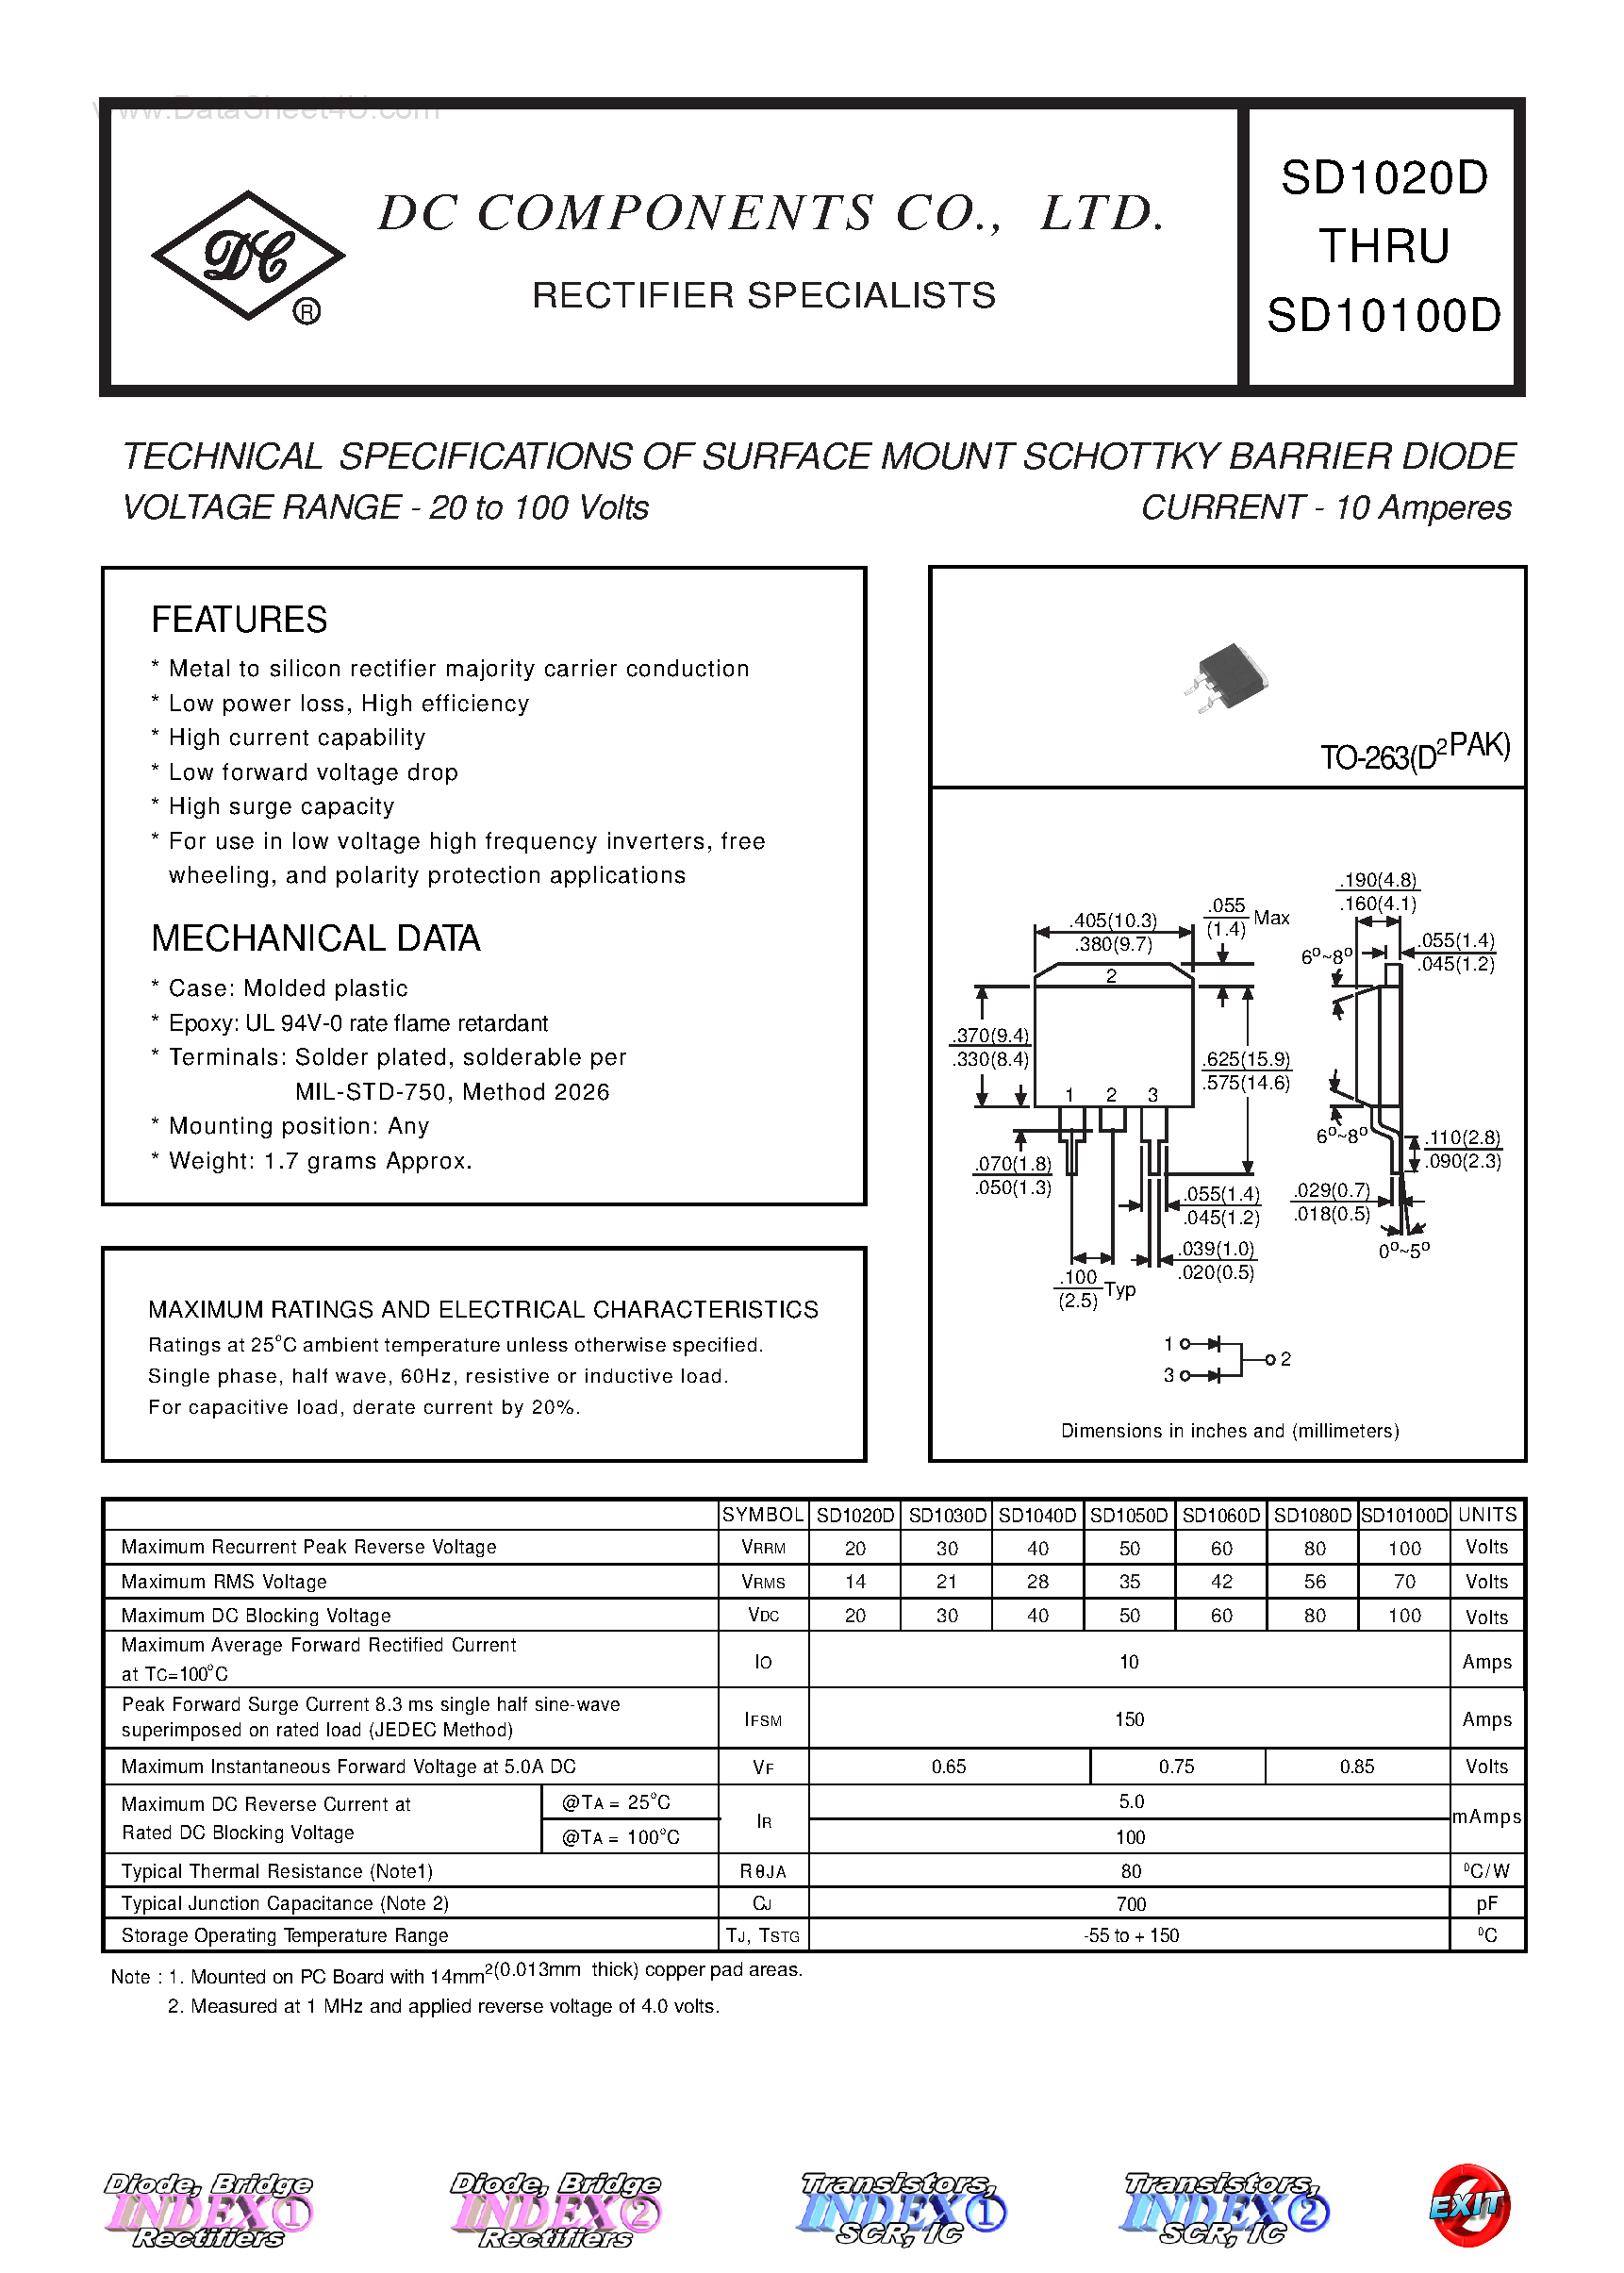 Datasheet SD10100D - (SD1020D - SD10100D) TECHNICAL SPECIFICATIONS OF SURFACE MOUNT SCHOTTKY BARRIER DIODE page 1